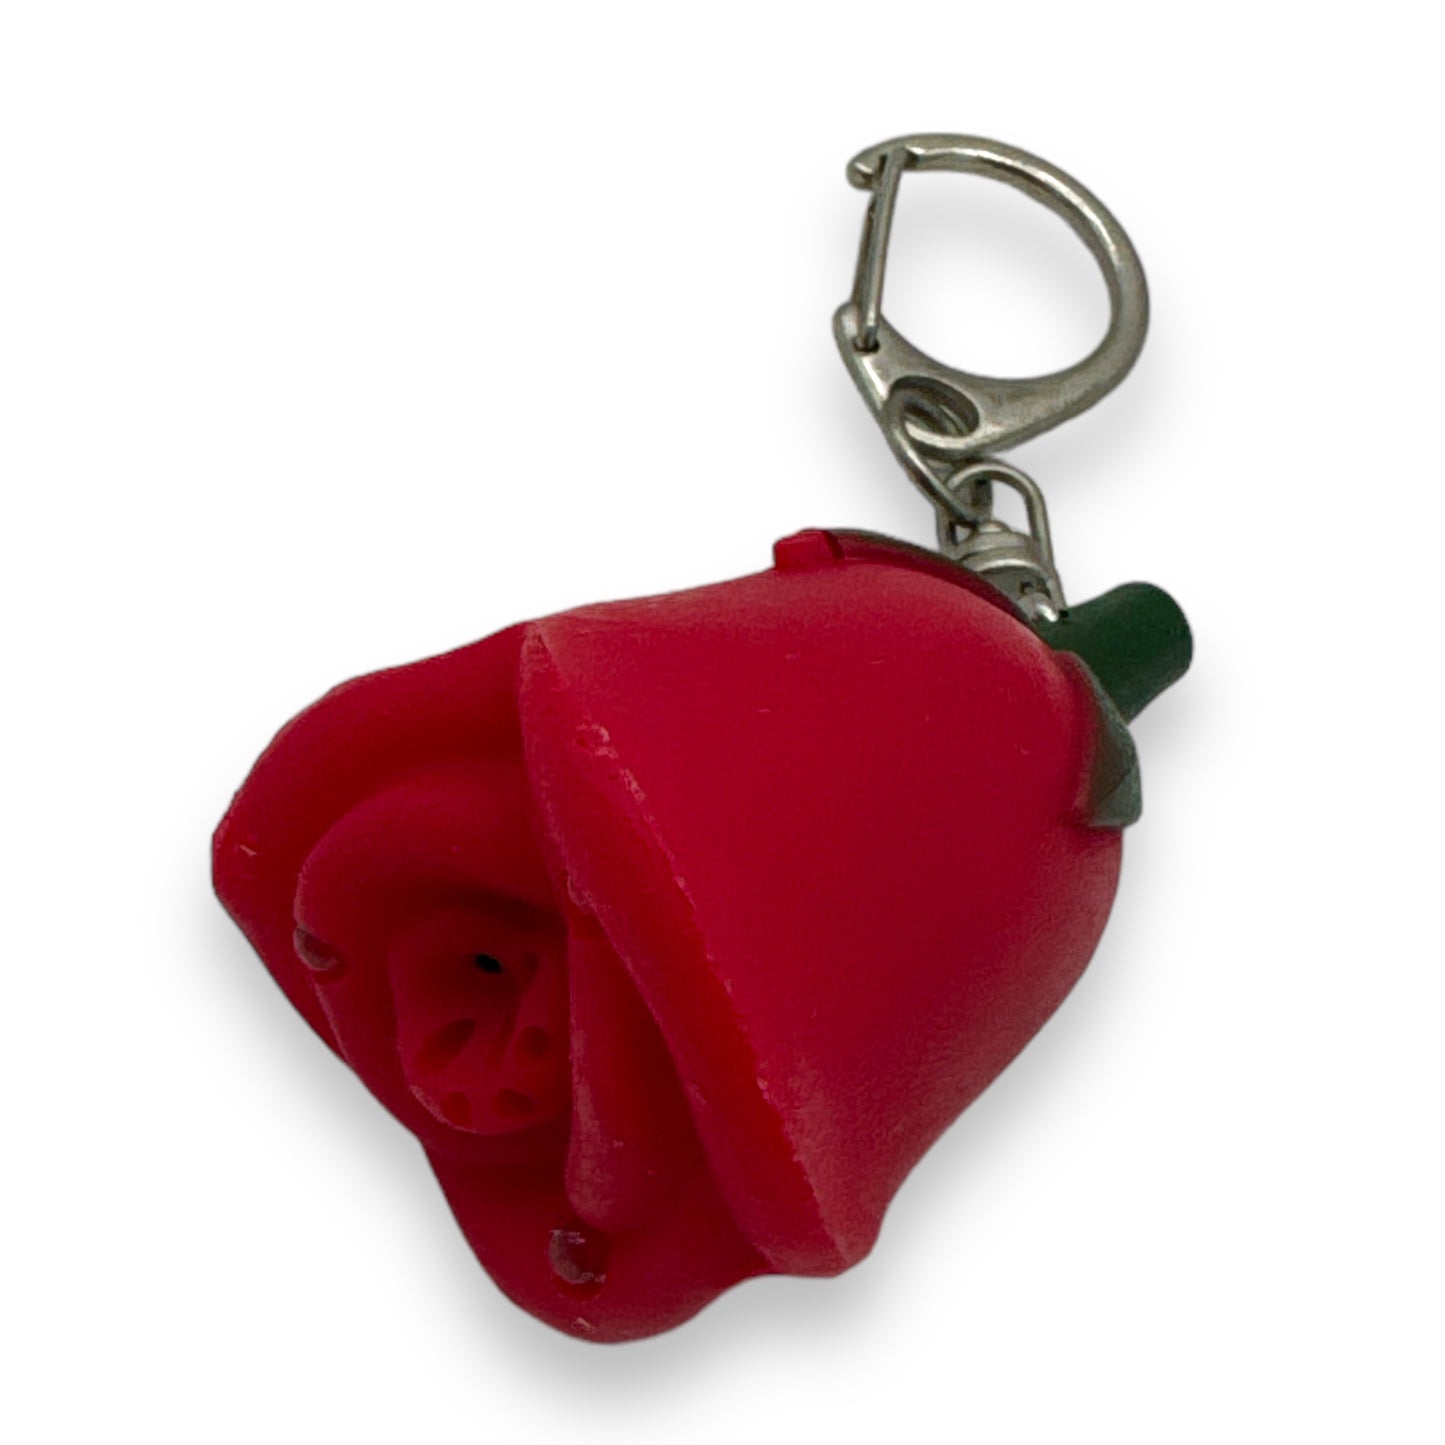 Kinky Pleasure - MP058 - Keychain Rose with Light and Sound "I Love You" - Red